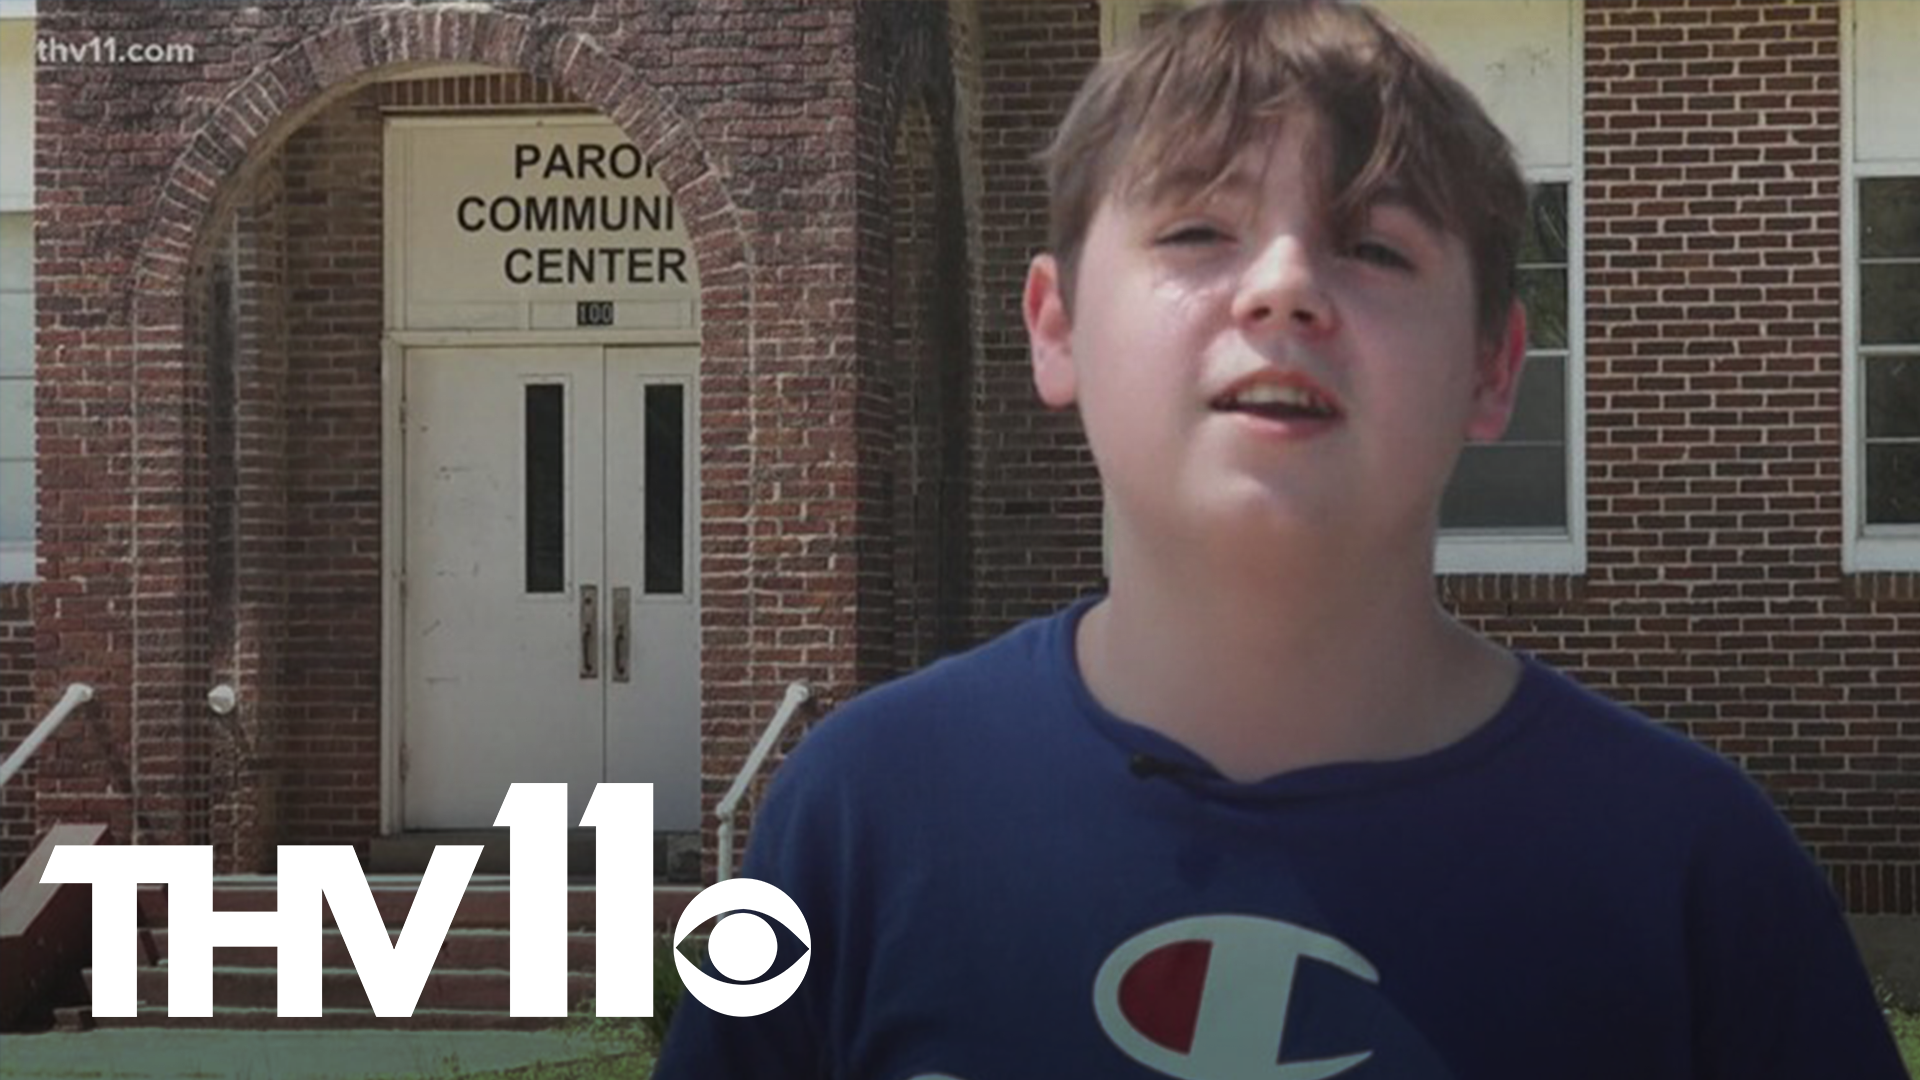 A 13-year-old Paron boy is tired of riding a school bus 40 minutes each day. The old school building is vacant, and he has a big idea that needs community support.